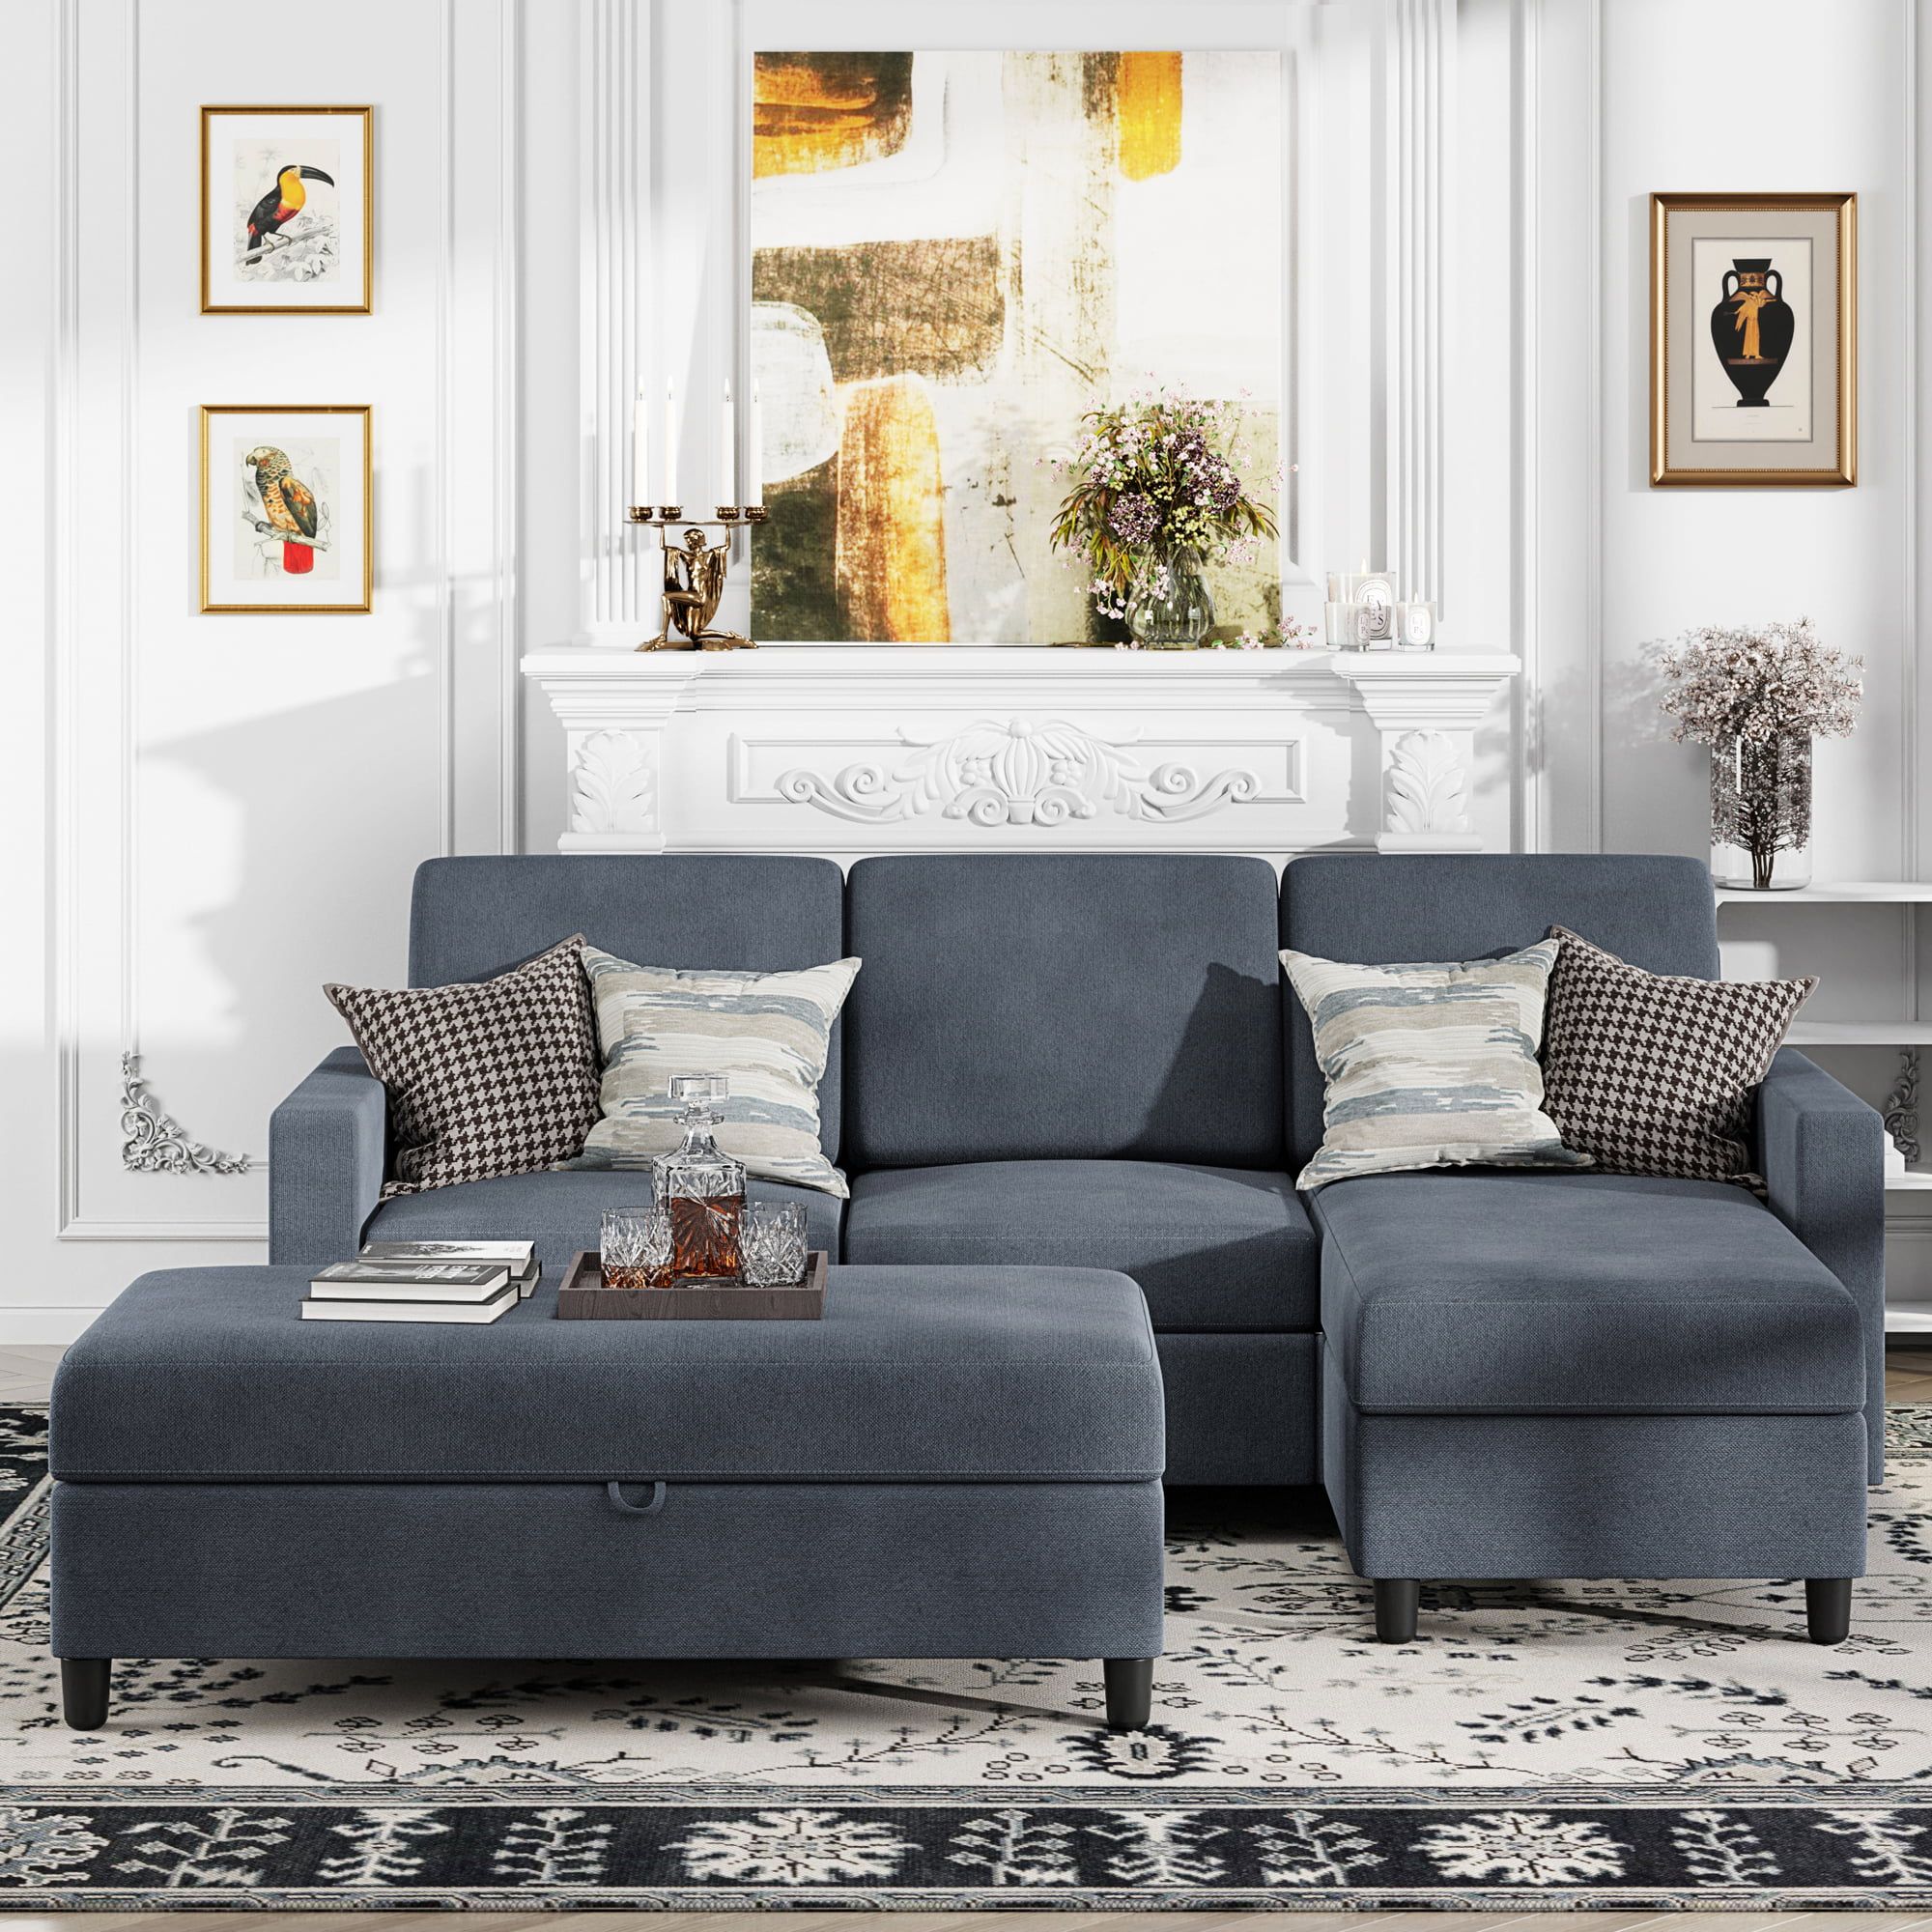 12 cheap sectional couches under $500 that look luxurious